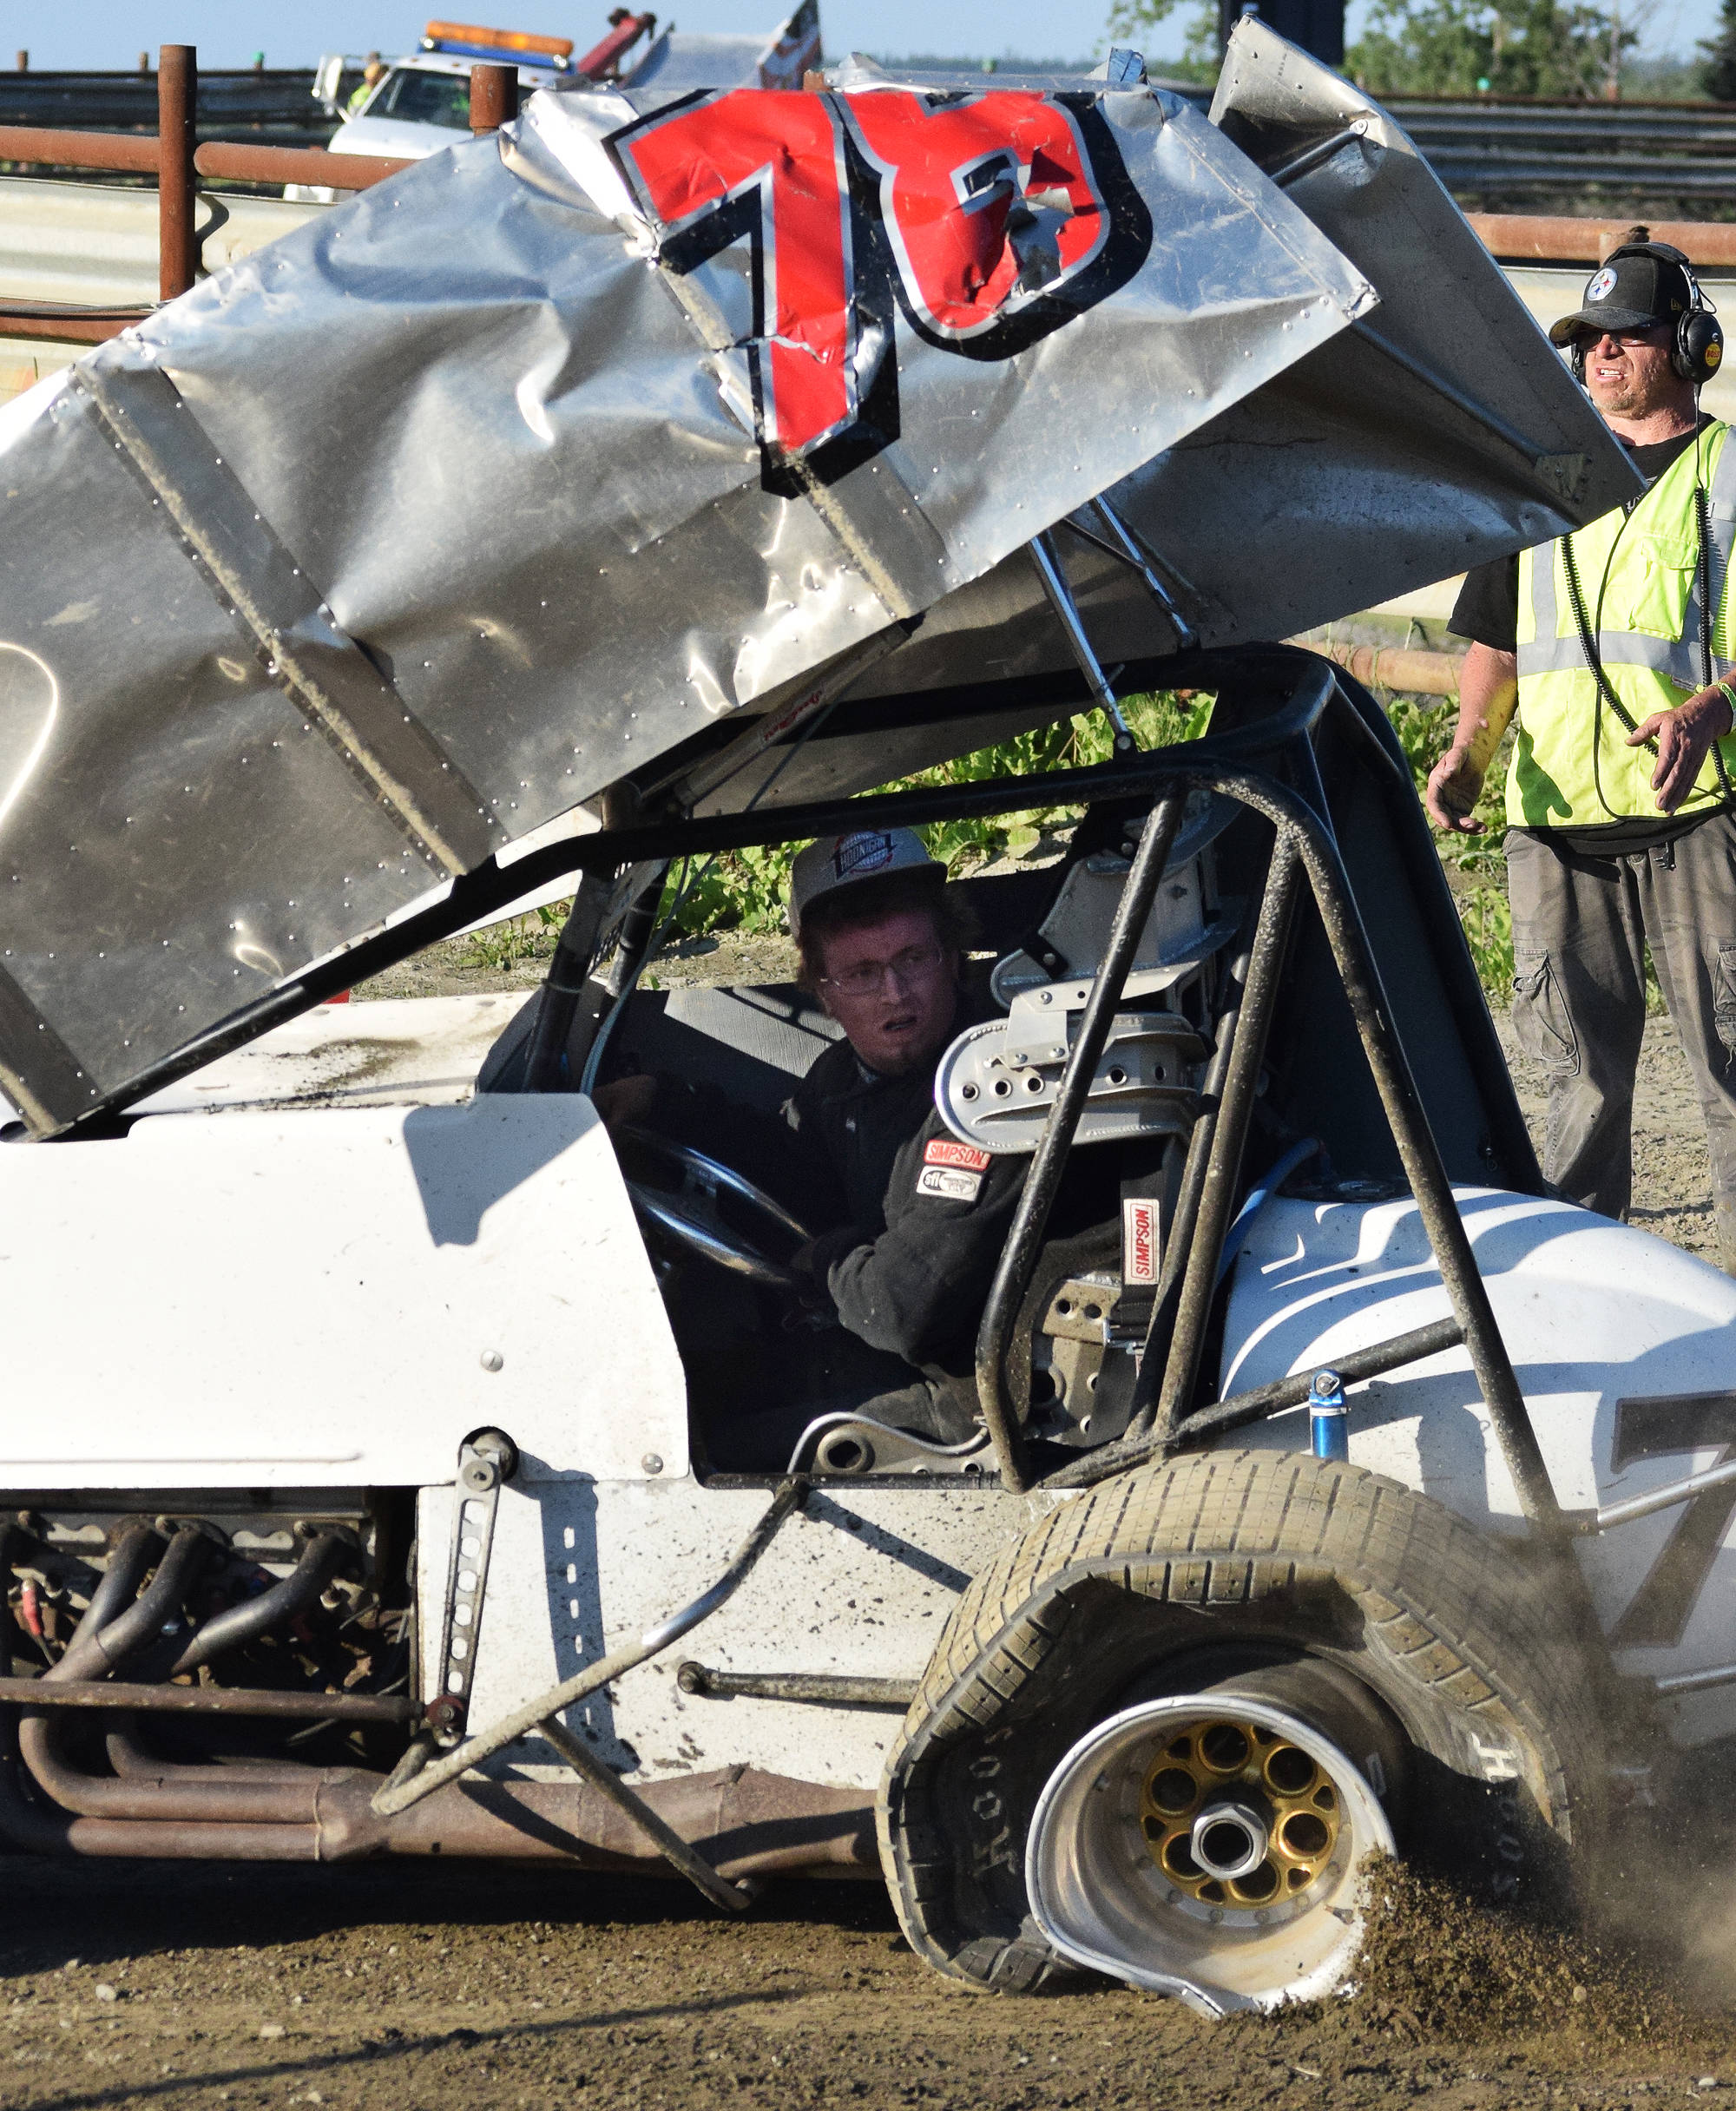 Logan McDonald steers his father John’s crumpled No. 78 Sprint car back to the pits after John endured a rollover crash during the running of the Alaska Dirt Track Shootout held Saturday at Twin City Raceway in Kenai. (Photo by Joey Klecka/Peninsula Clarion)